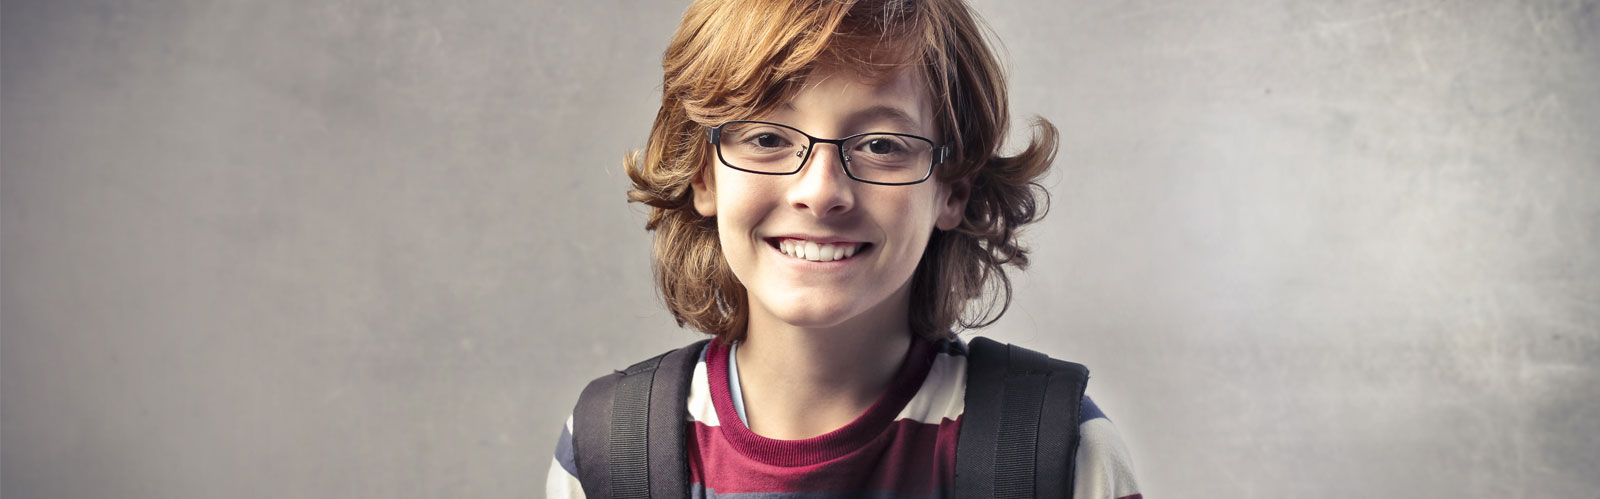 Young man with long hair wearing nice glasses and a backpack